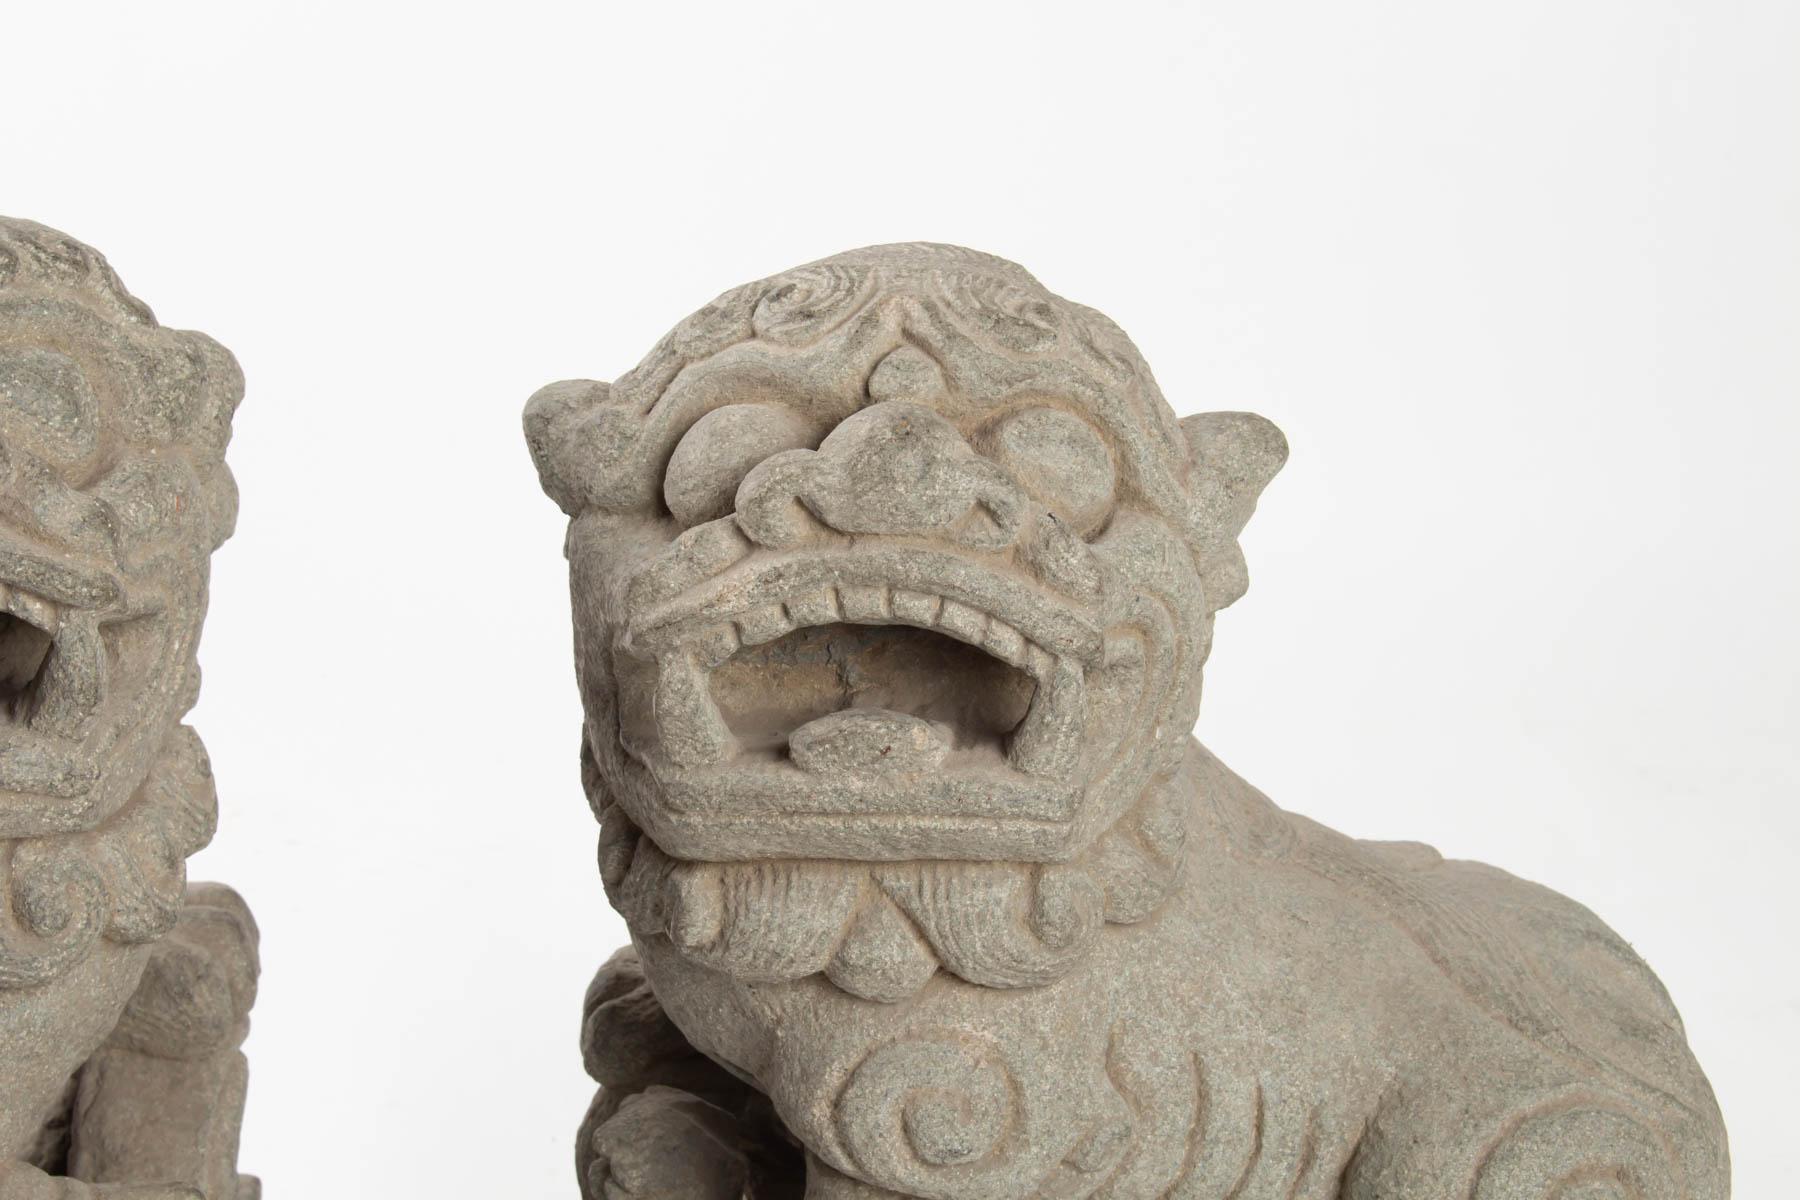 Pair of dogs Fo stone Monobloque. China, early 20th century, Asian Art, male and female.
Measures: H 33cm, W 25cm, W 18cm.